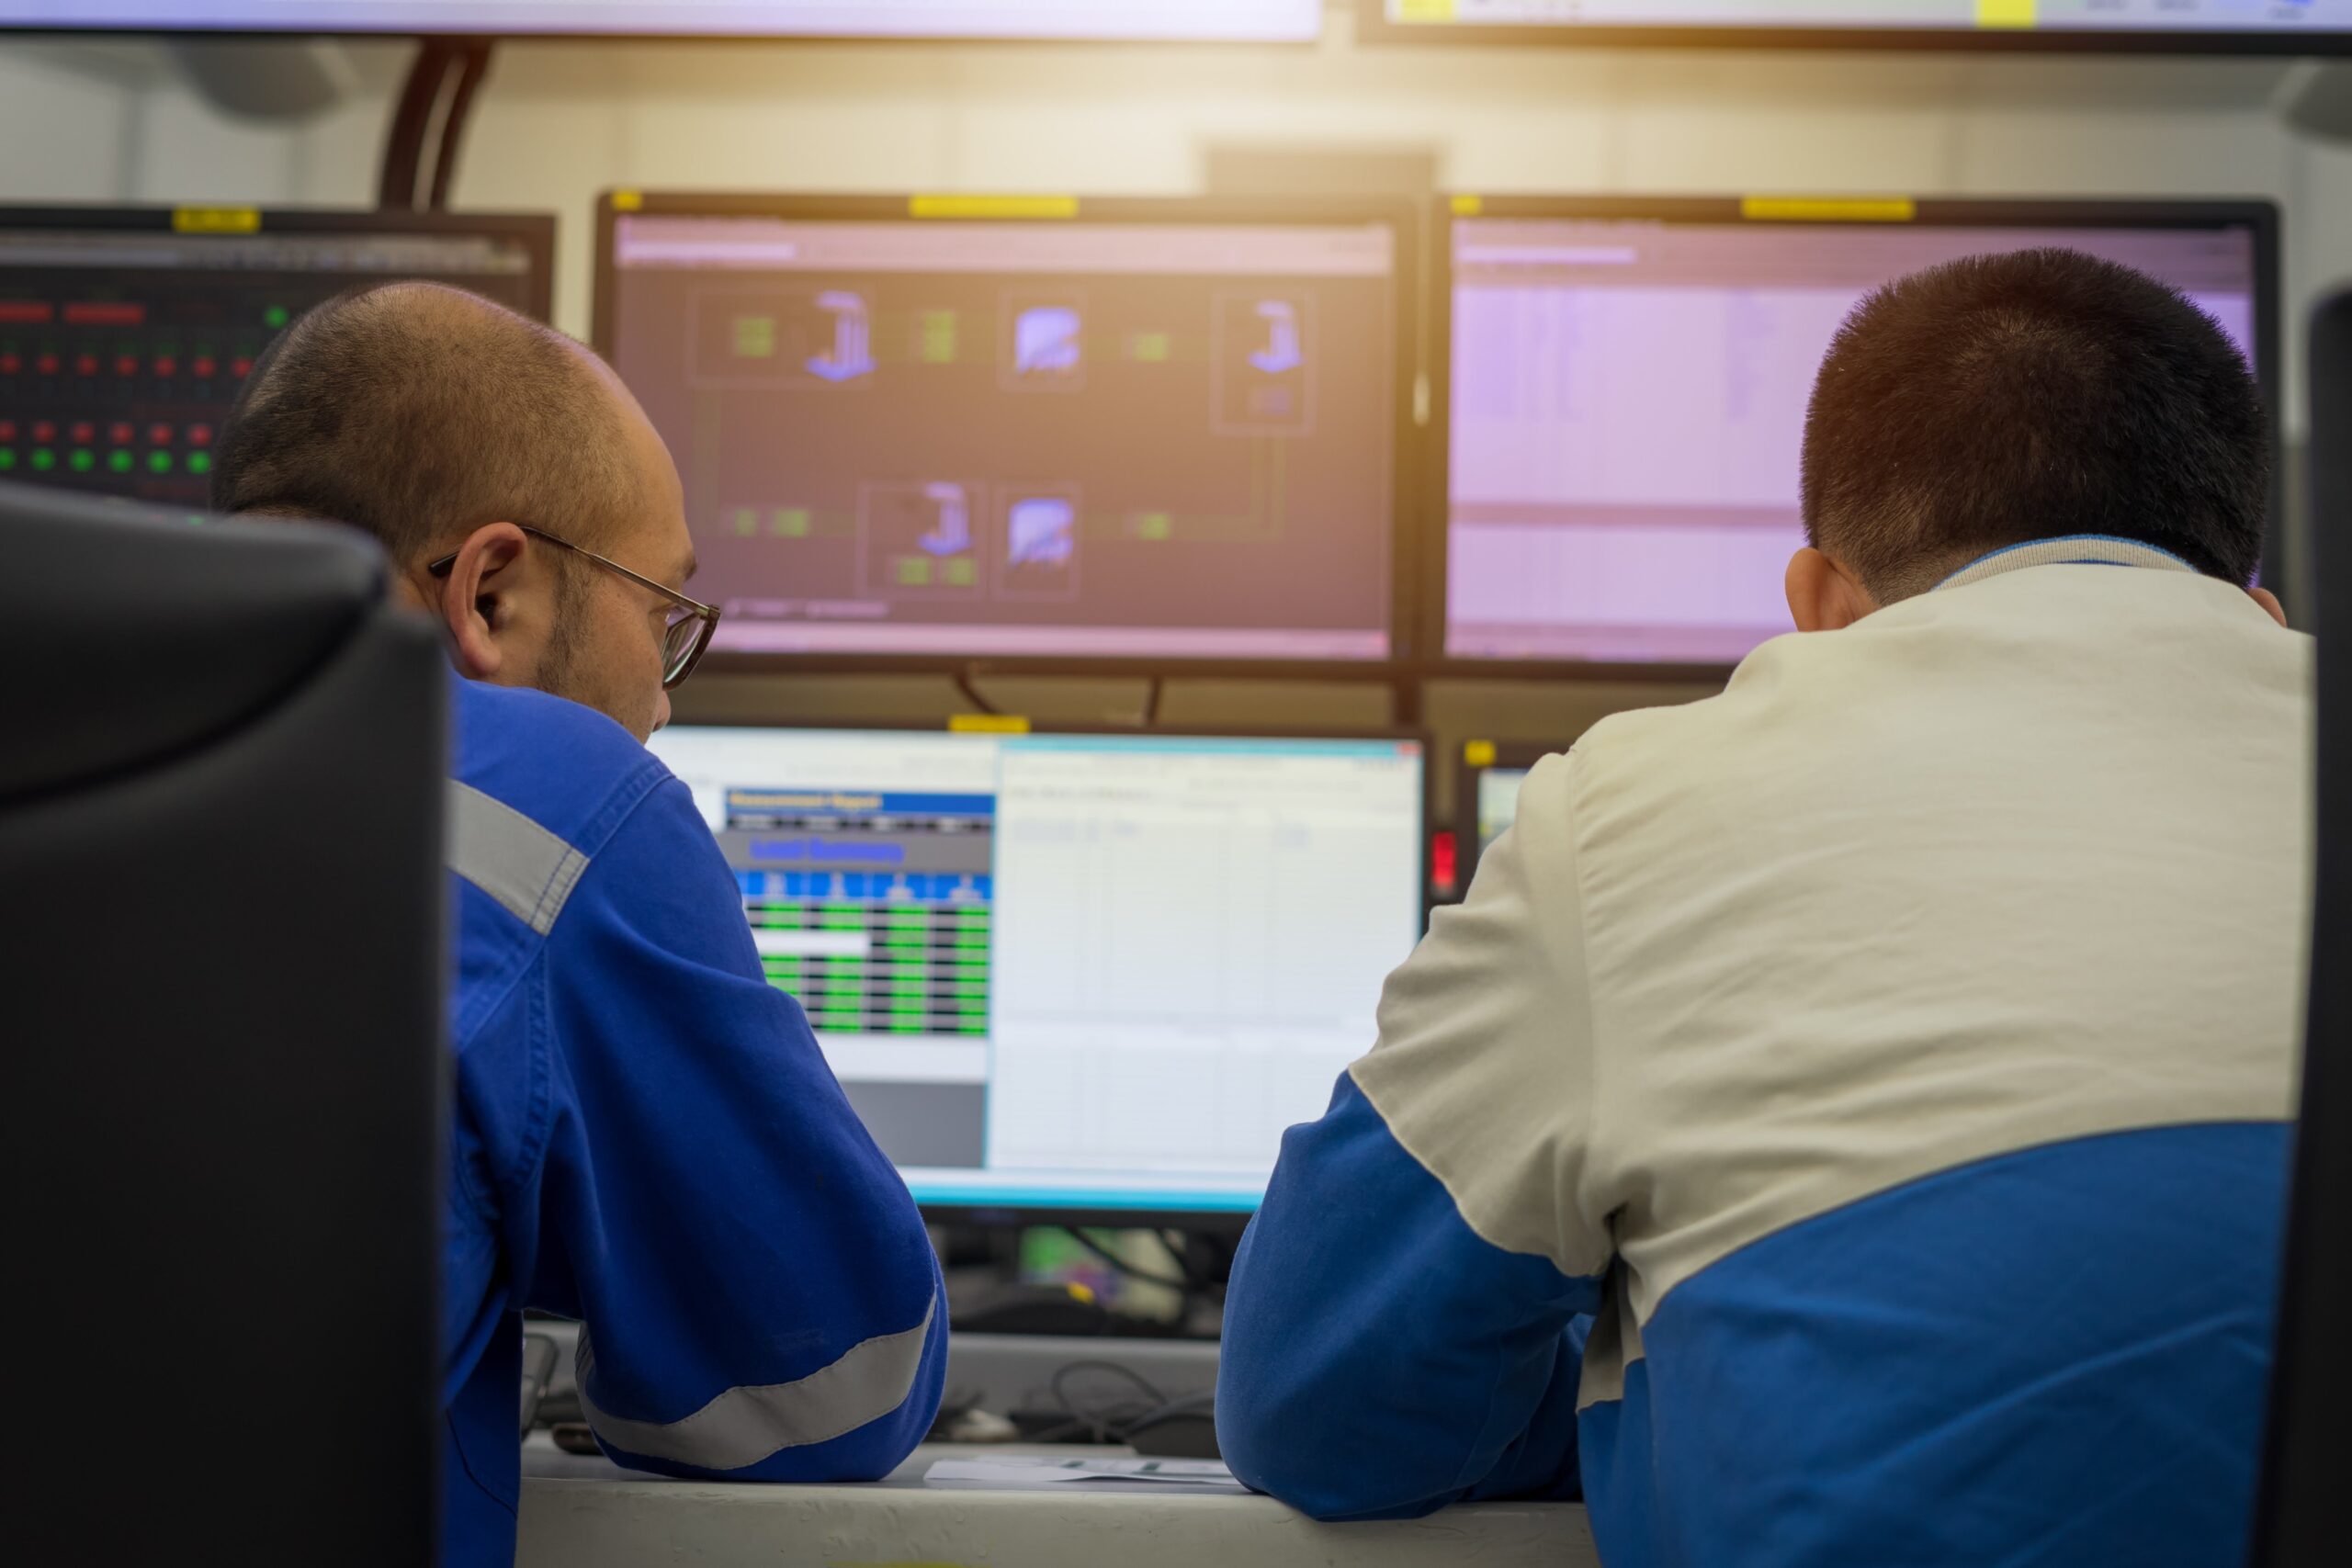 Two fleet managers monitoring data on computer screens.